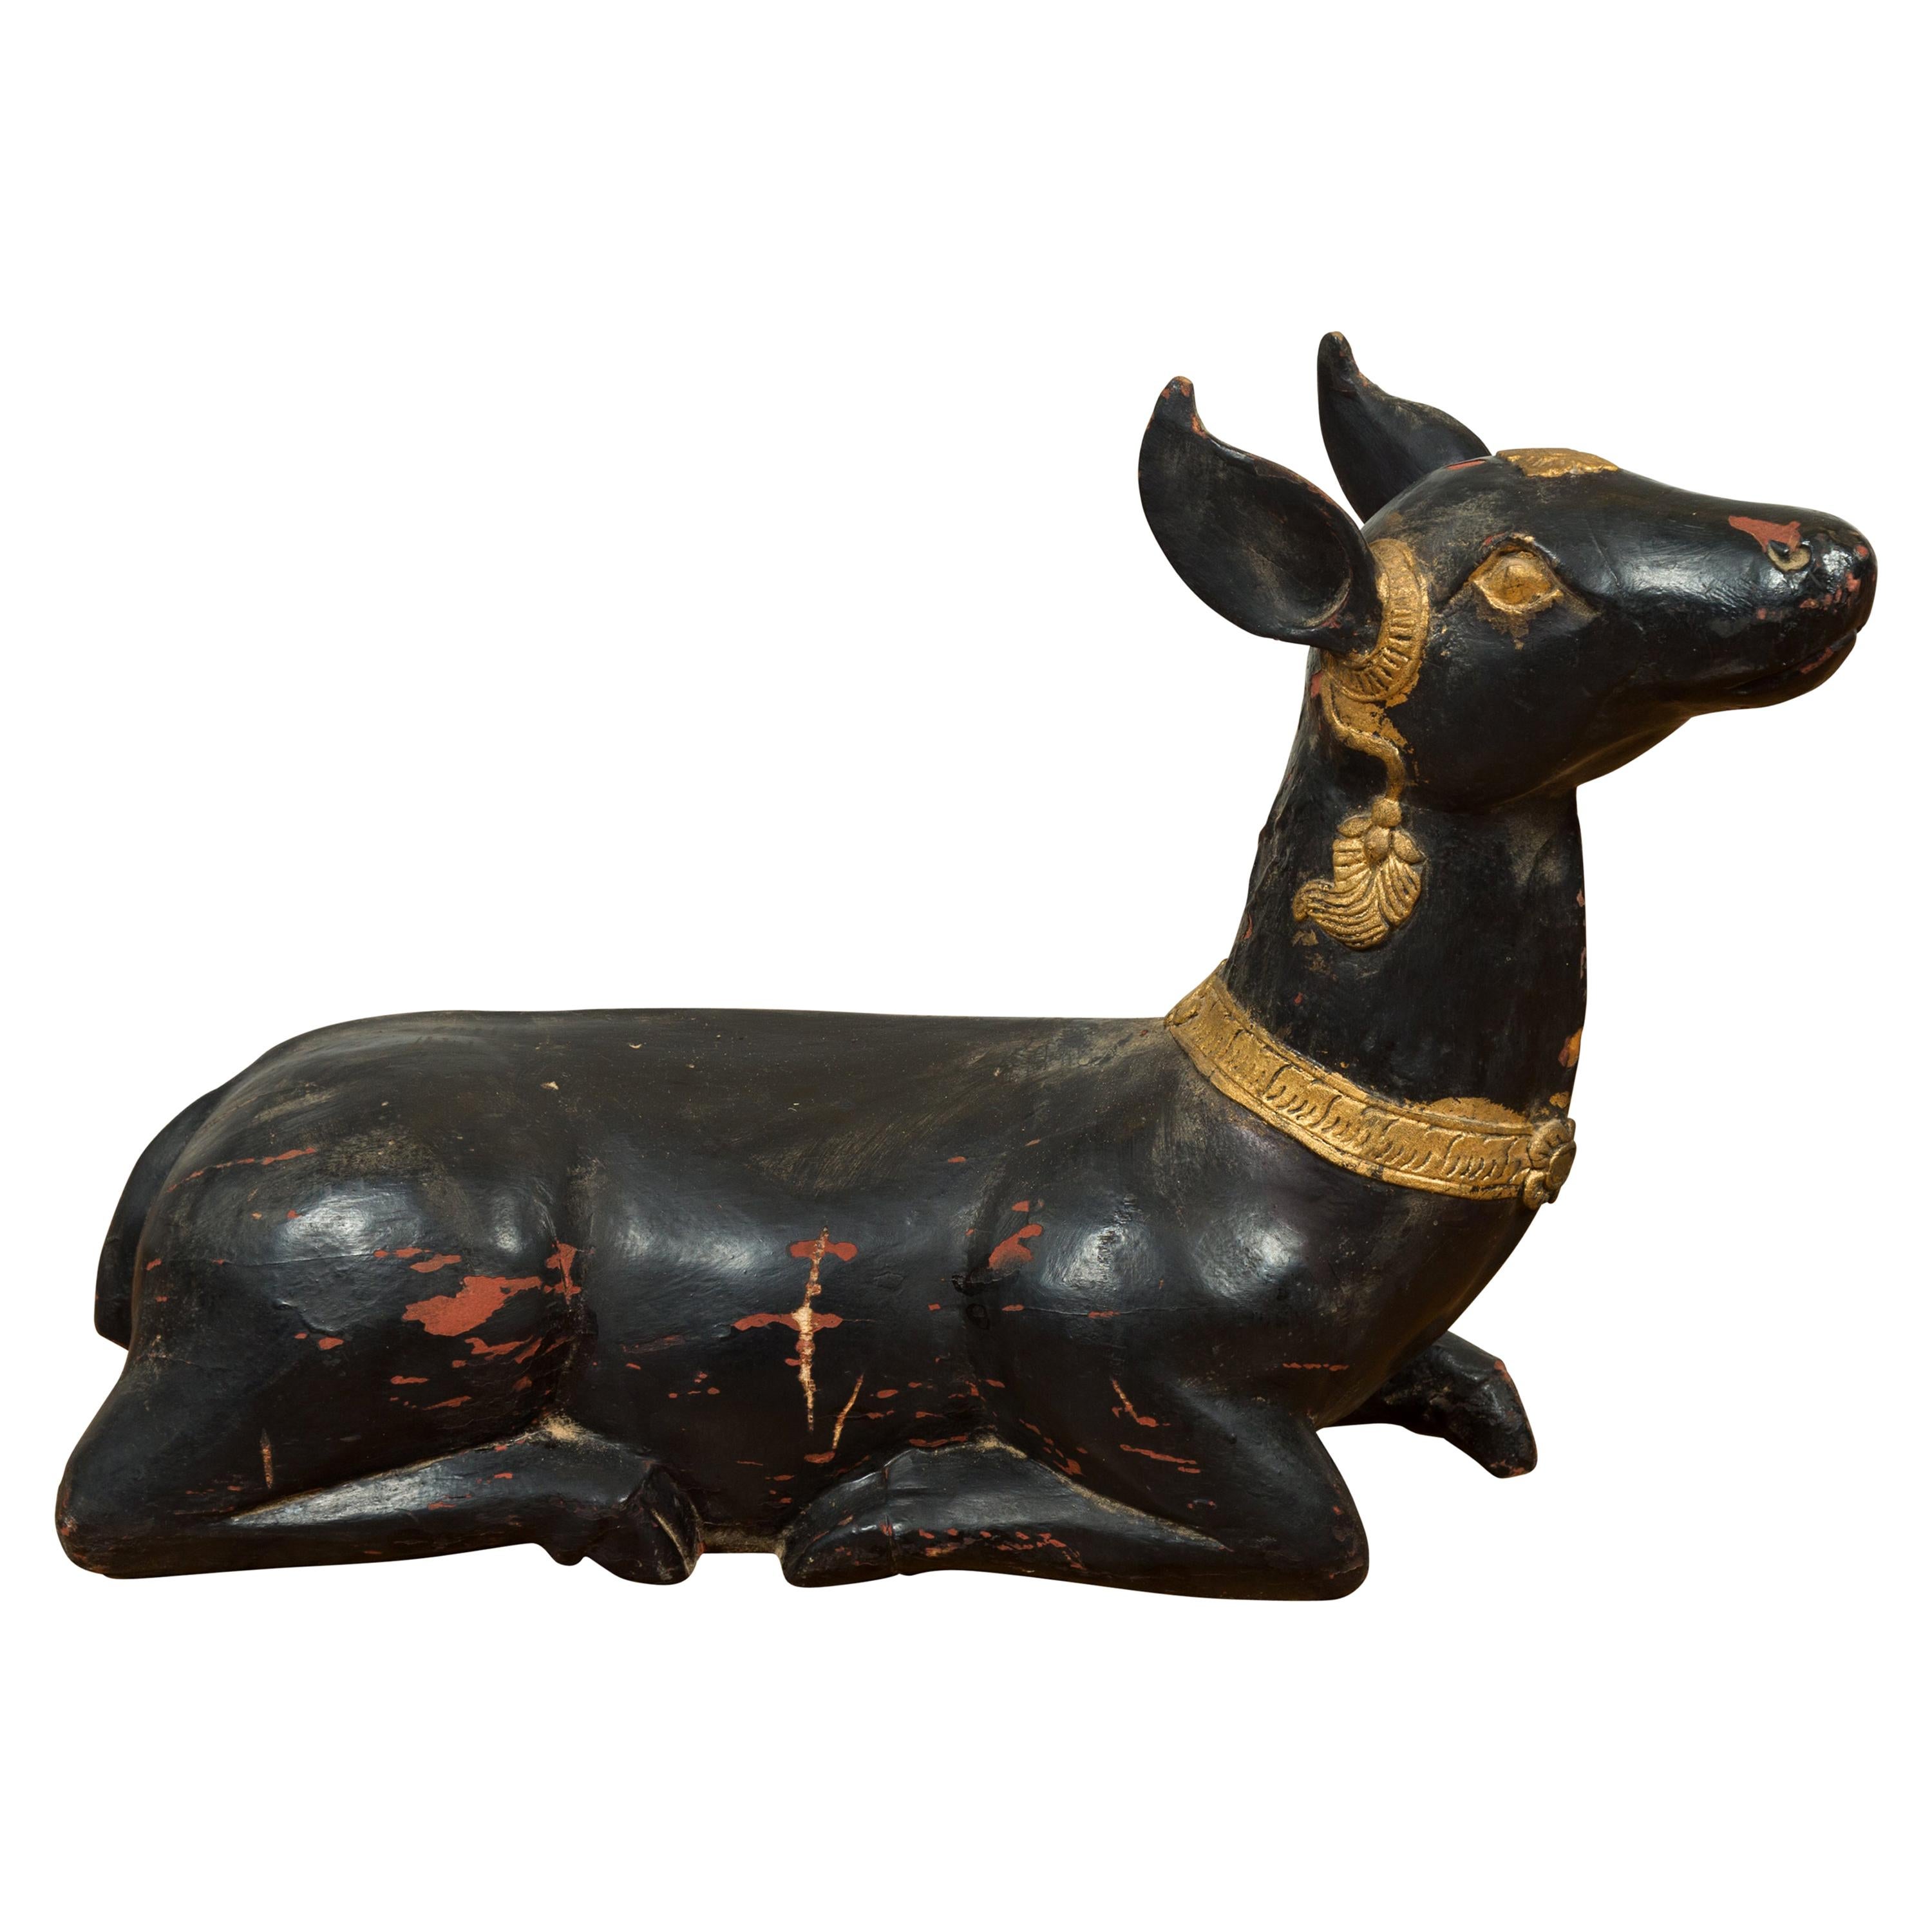 Vintage Thai Black Lacquered Goat Sculpture with Ornate Gilt Jewelry Motifs